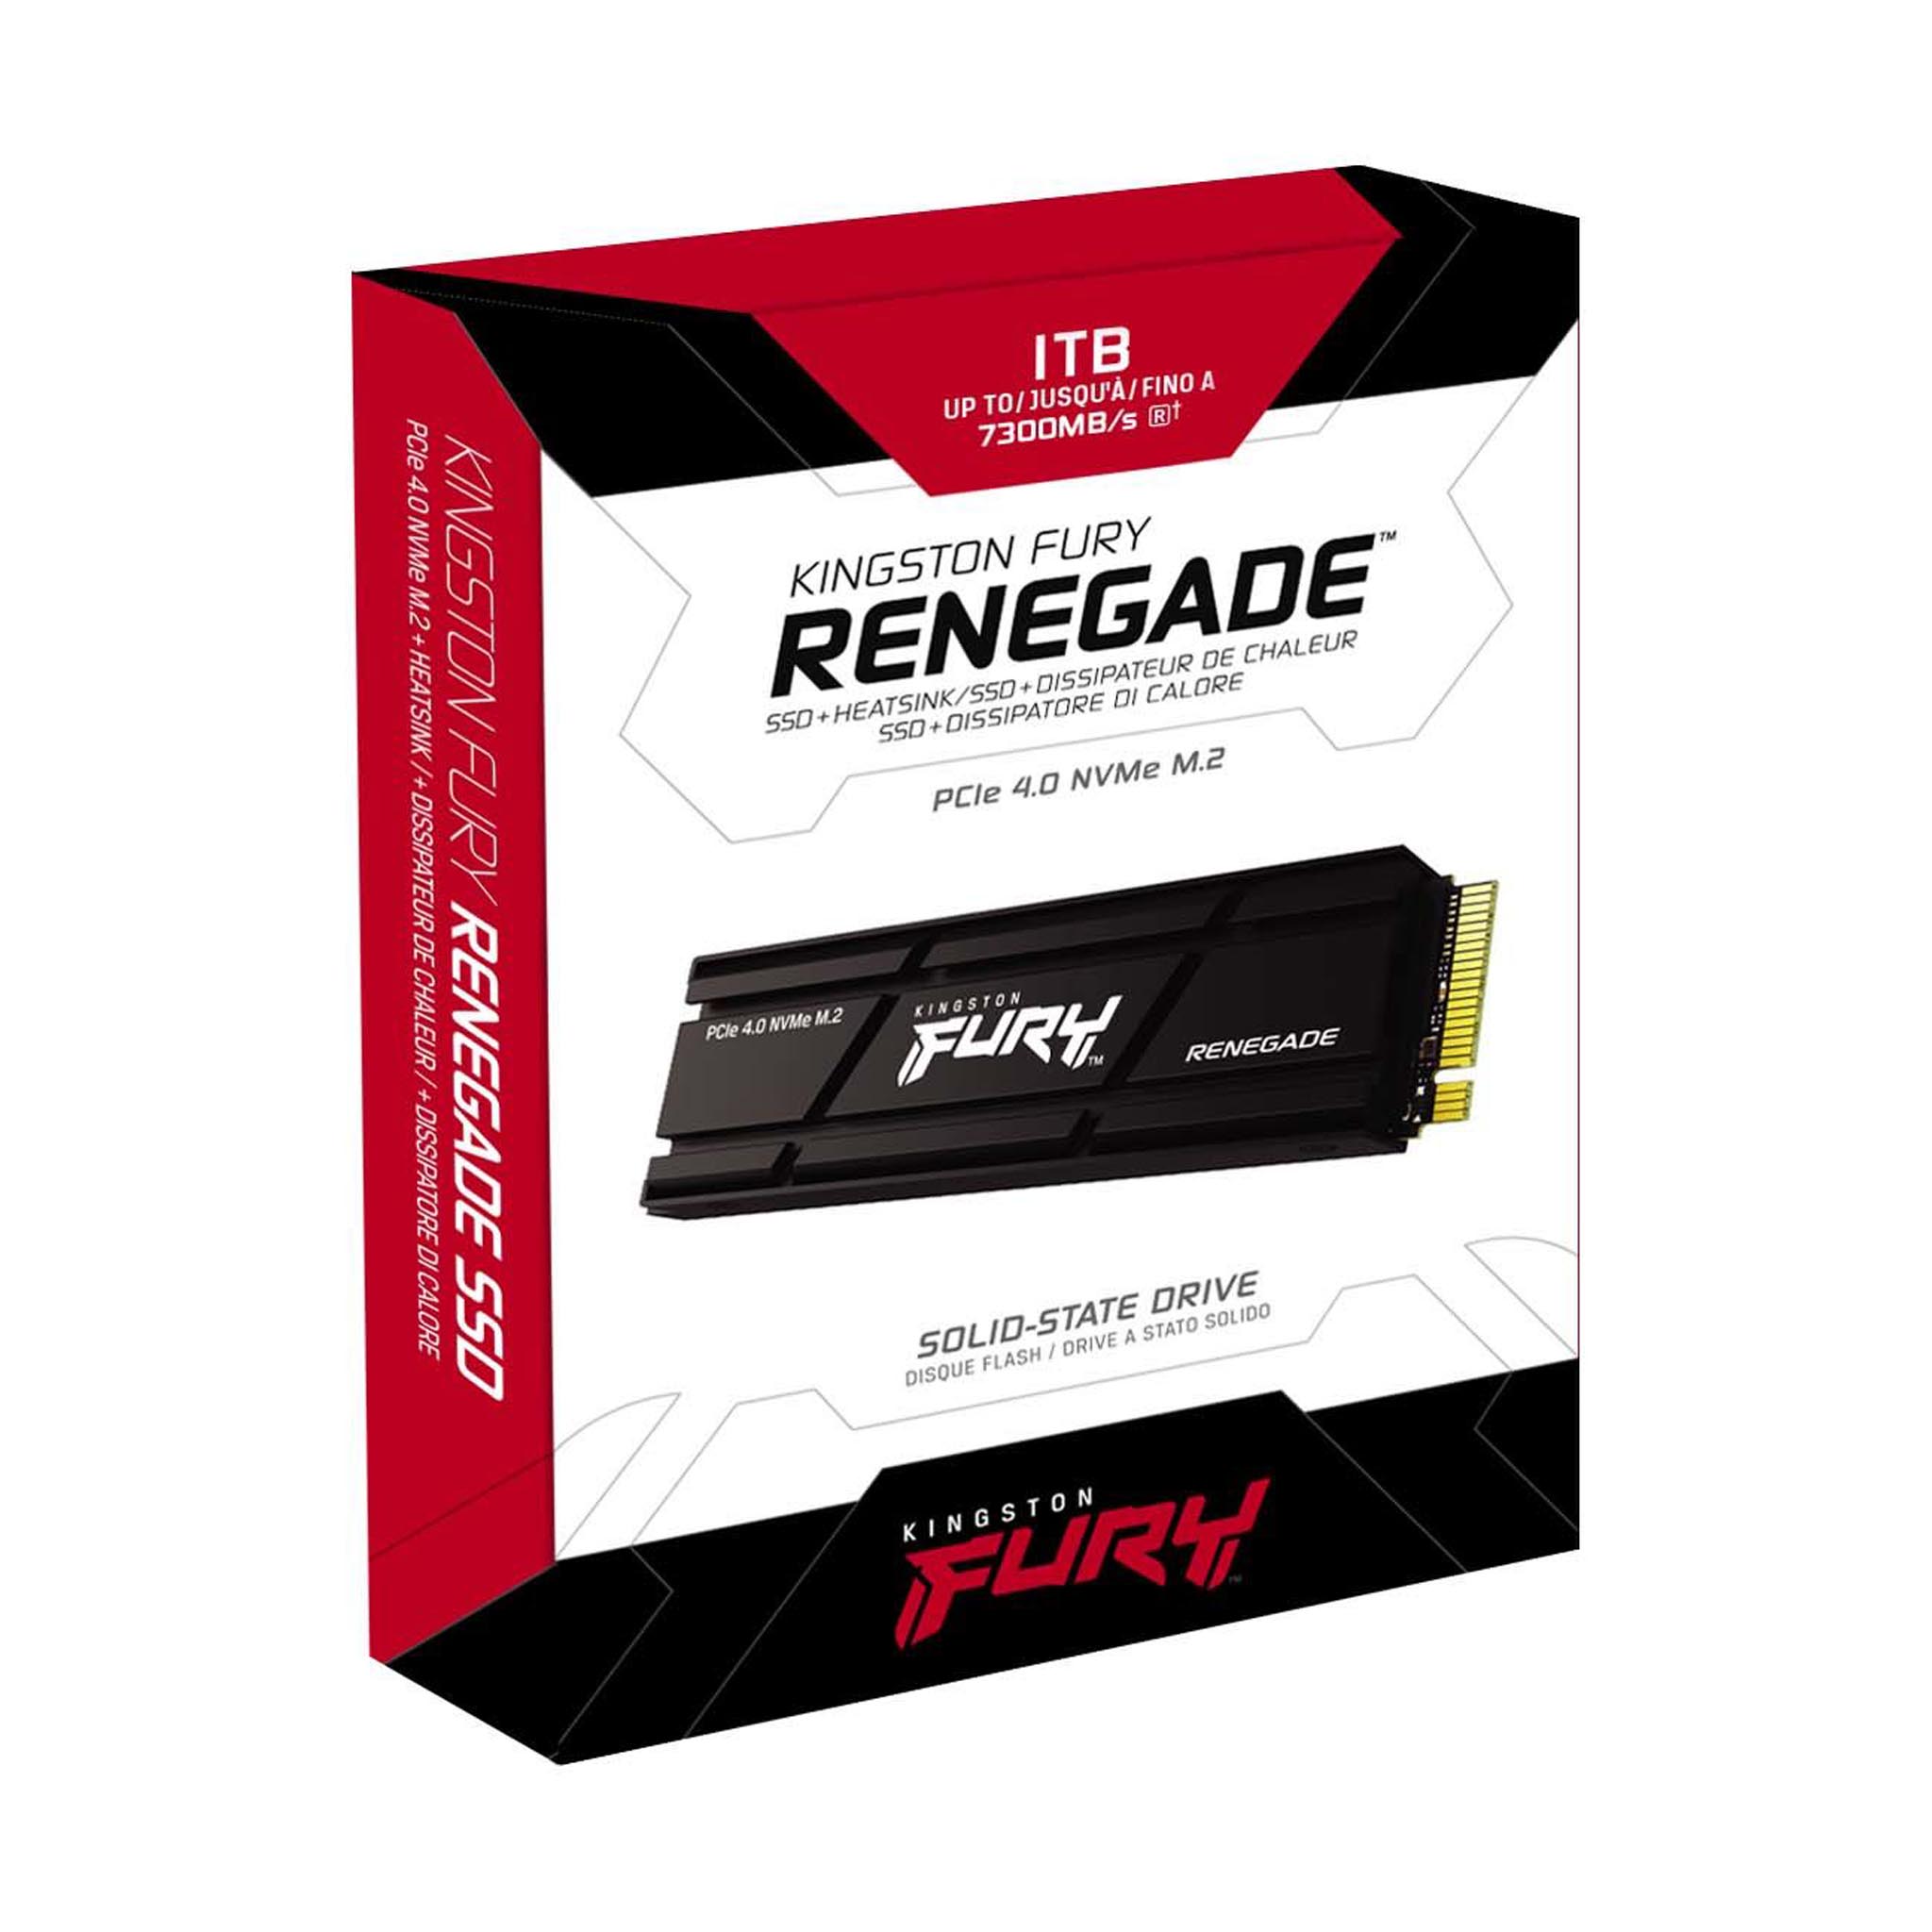 Kingston FURY Renegade 1TB PCIe 4.0 NVMe M.2 SSD FOR PC / PS5 WITH Heatsink